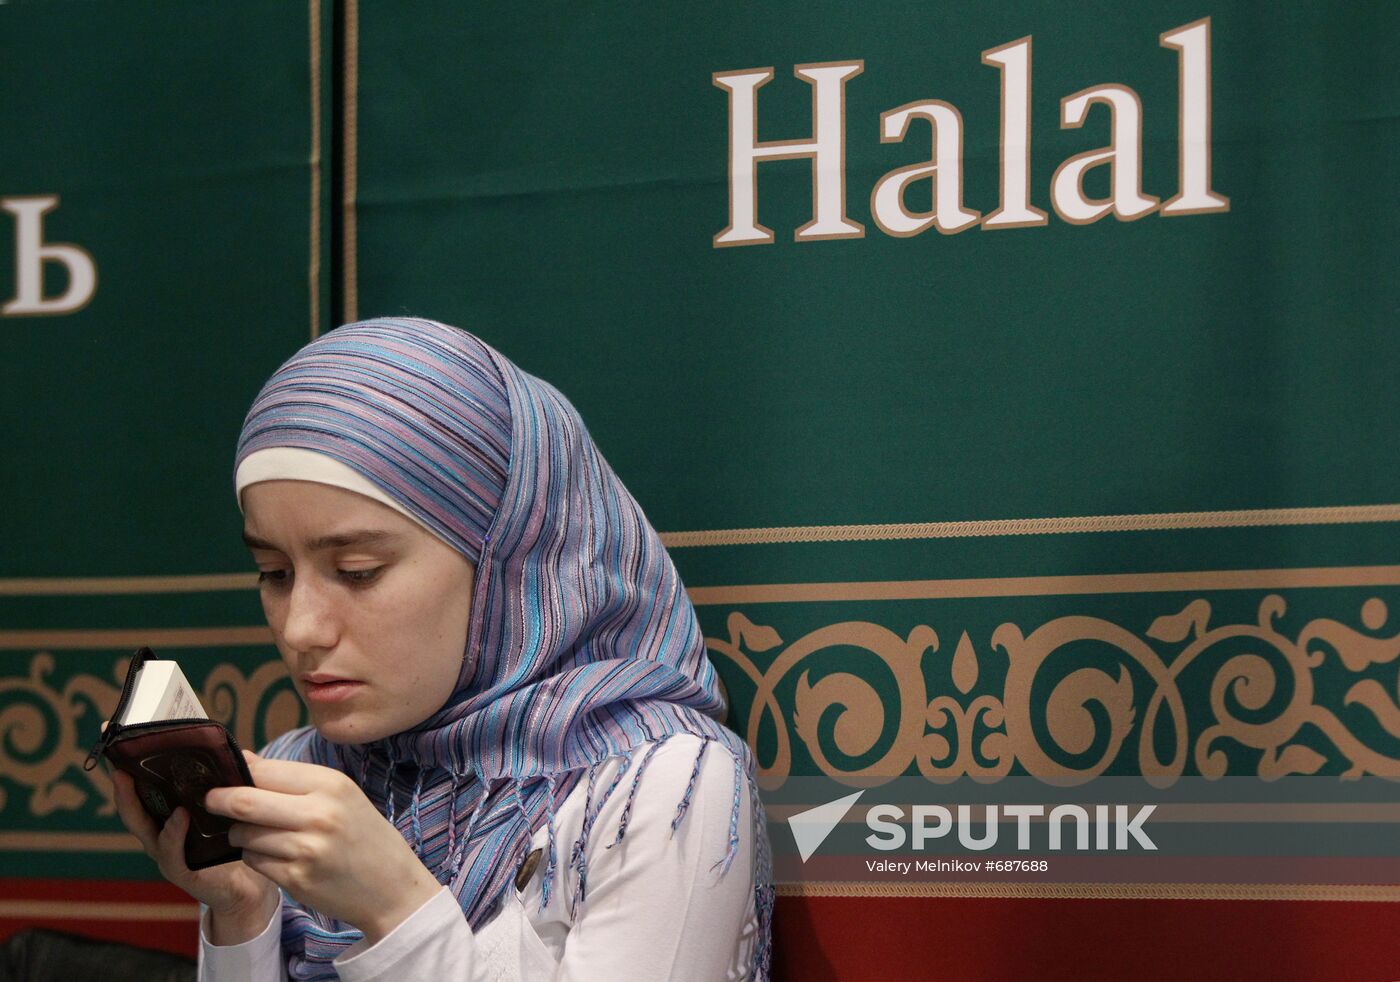 Halal First International Exhibition in Moscow